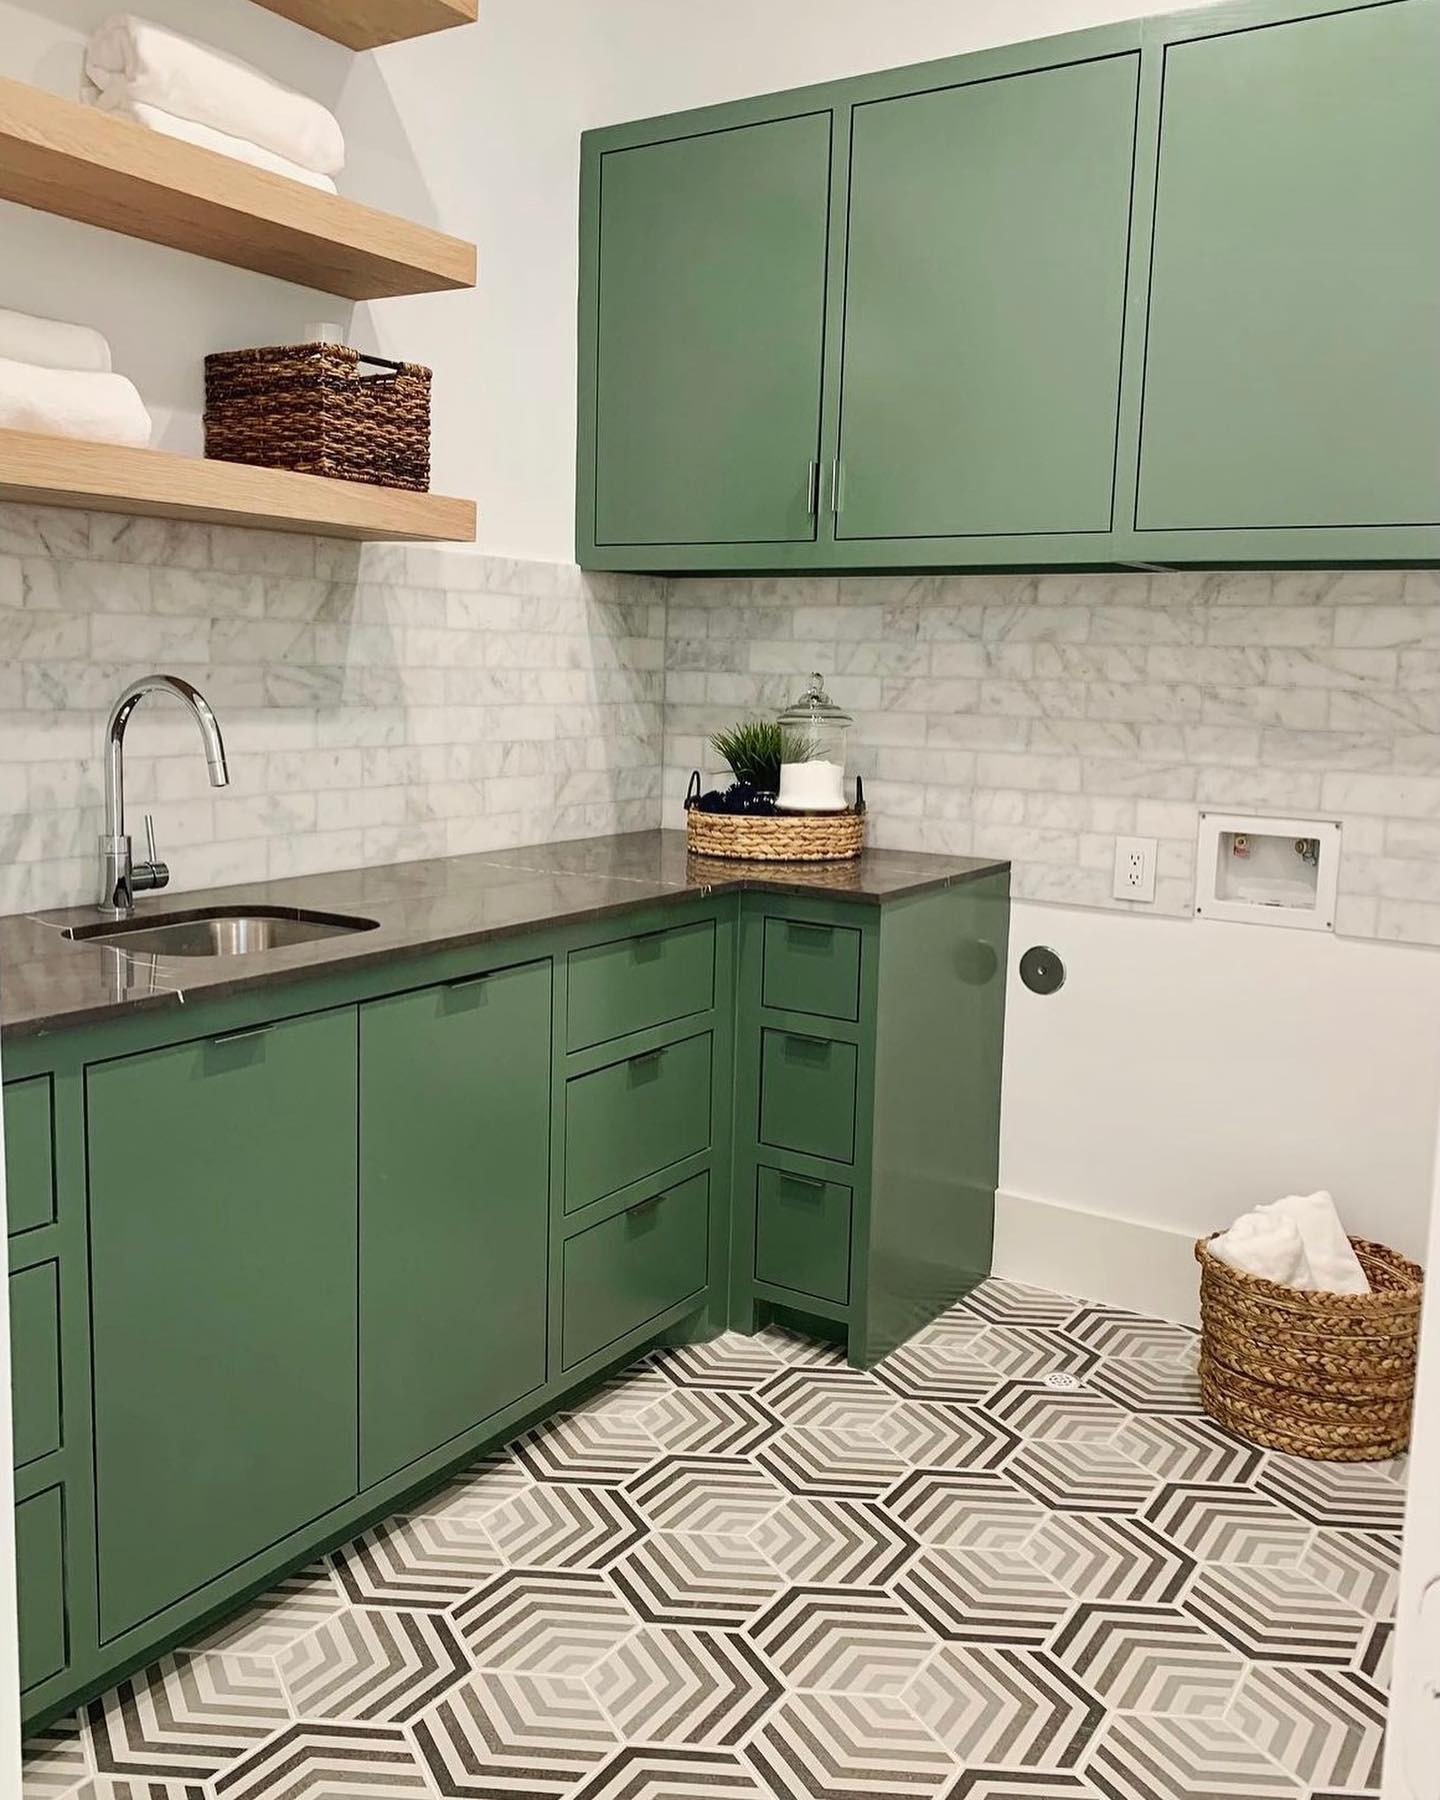 Friday Favorites 💚 Add some flair to your laundry room with a patterned tile floor. We love how this space turned out featuring our Bauhaus collection in the style “Arrow.” #emsertile #tgif